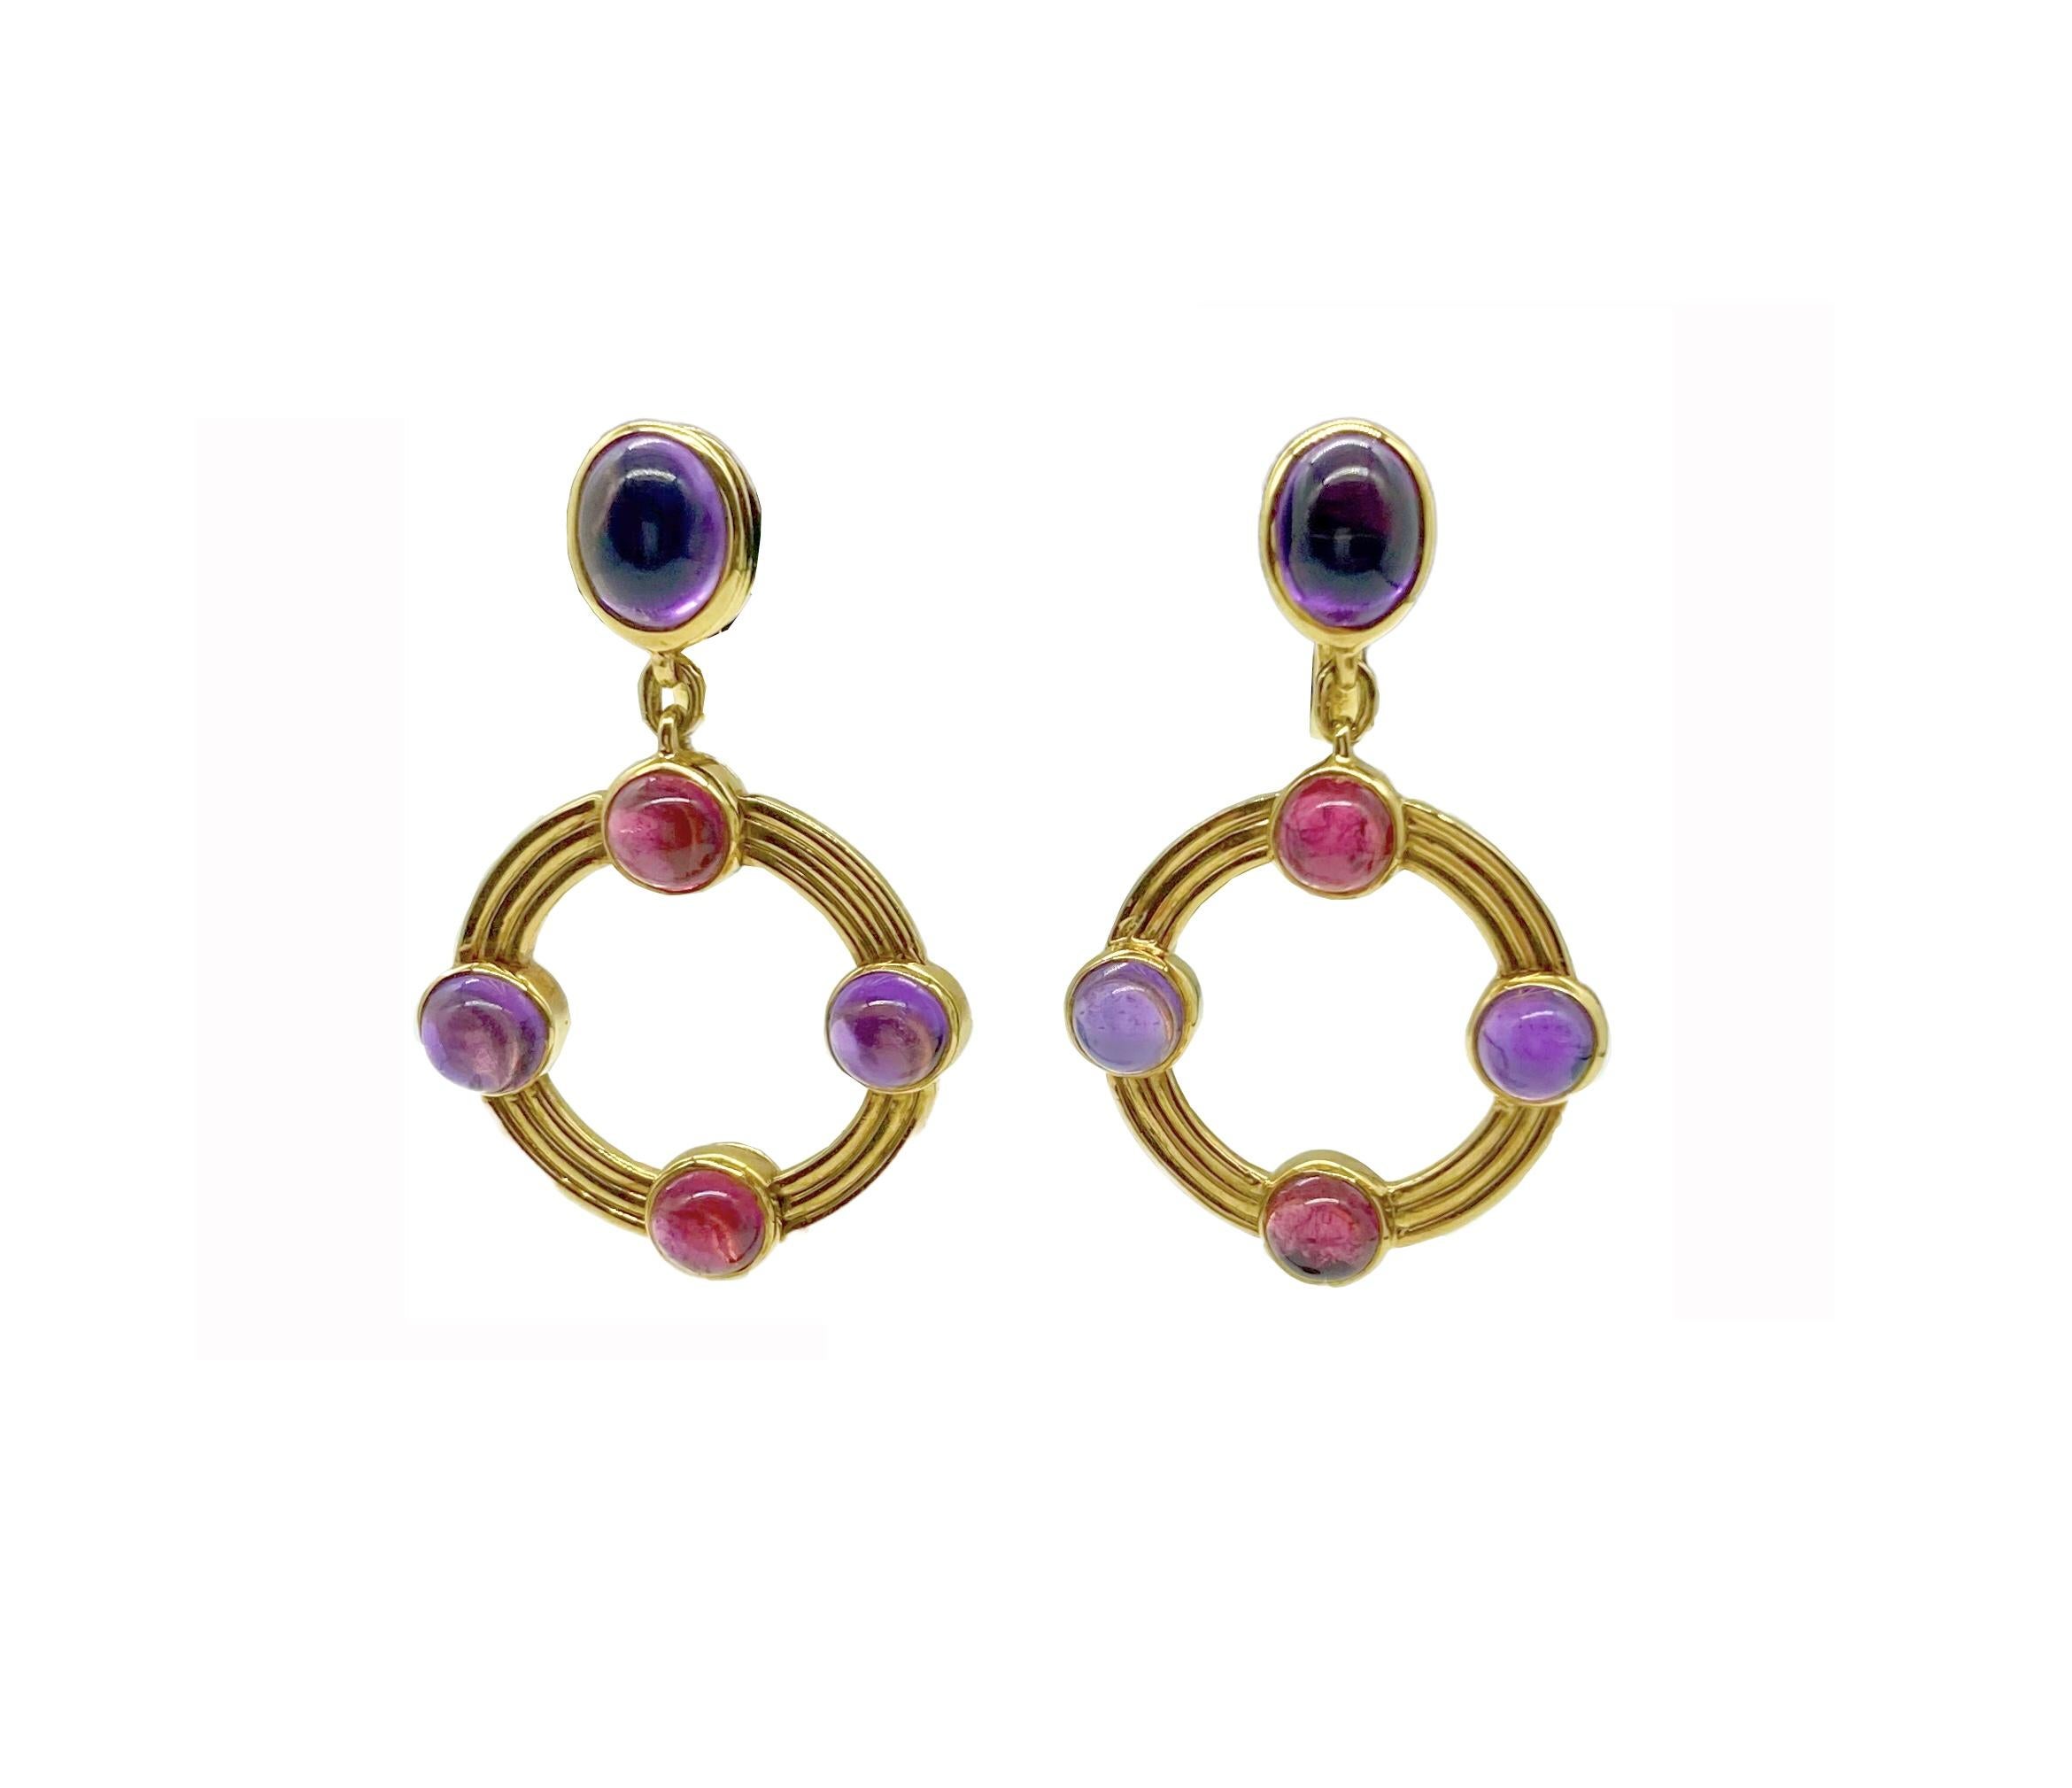 A chic pair of Bulgari 18 karat yellow gold drop earrings with cabochon amethysts and pink tourmalines. Made in Italy. 